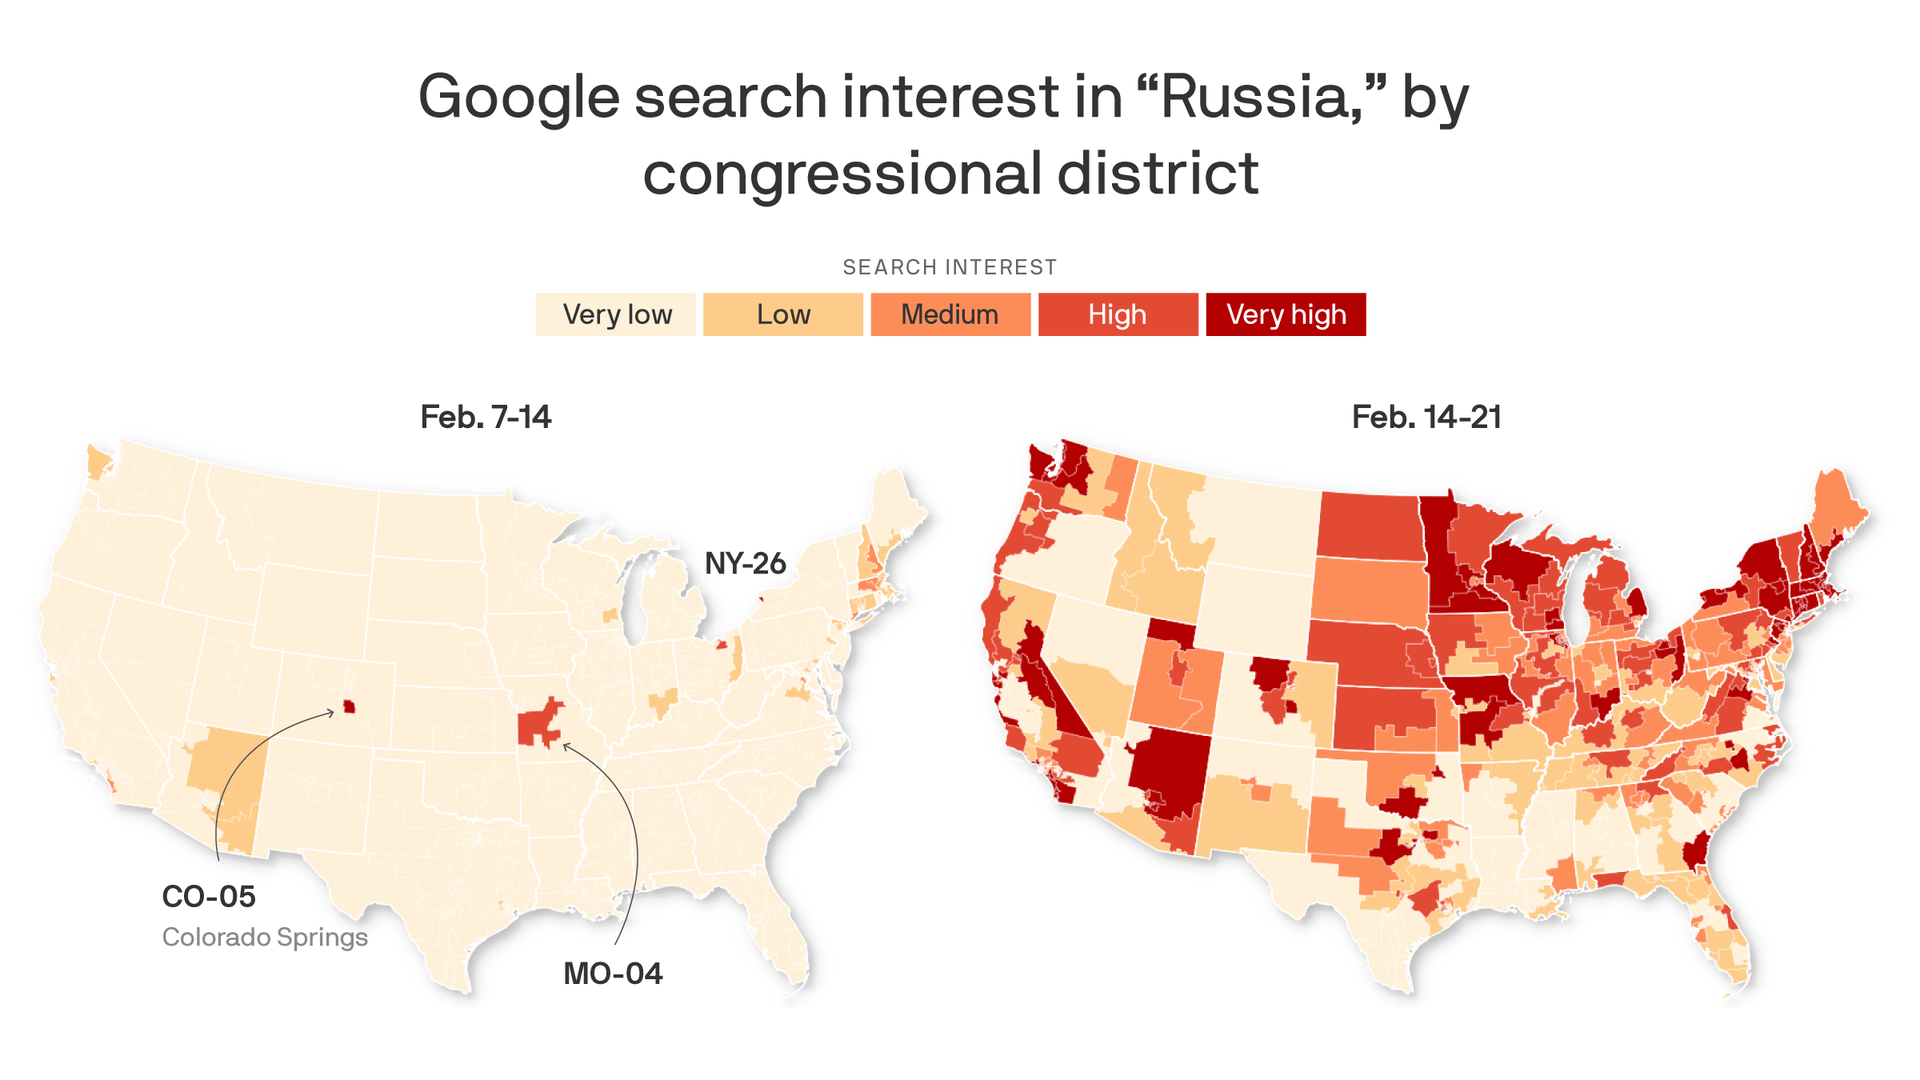 Colorado's military and academic communities are greatly interested in the Russian conflict in Ukraine, according to new Google Trends data and analysis.